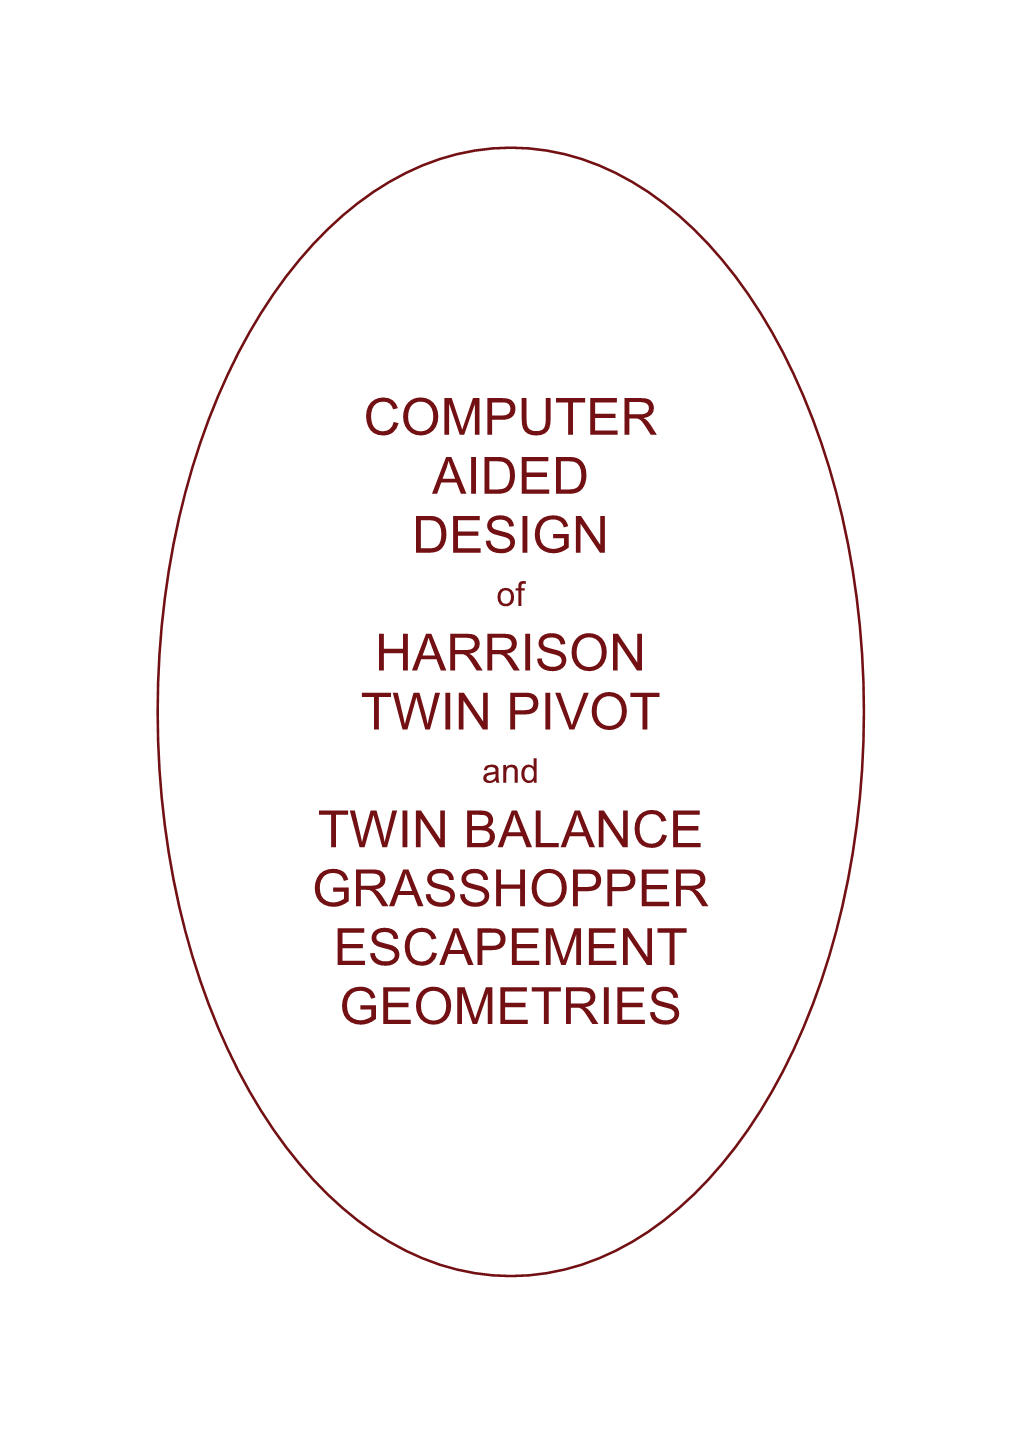 COMPUTER AIDED DESIGN of HARRISON TWIN PIVOT and TWIN BALANCE GRASSHOPPER ESCAPEMENT GEOMETRIES